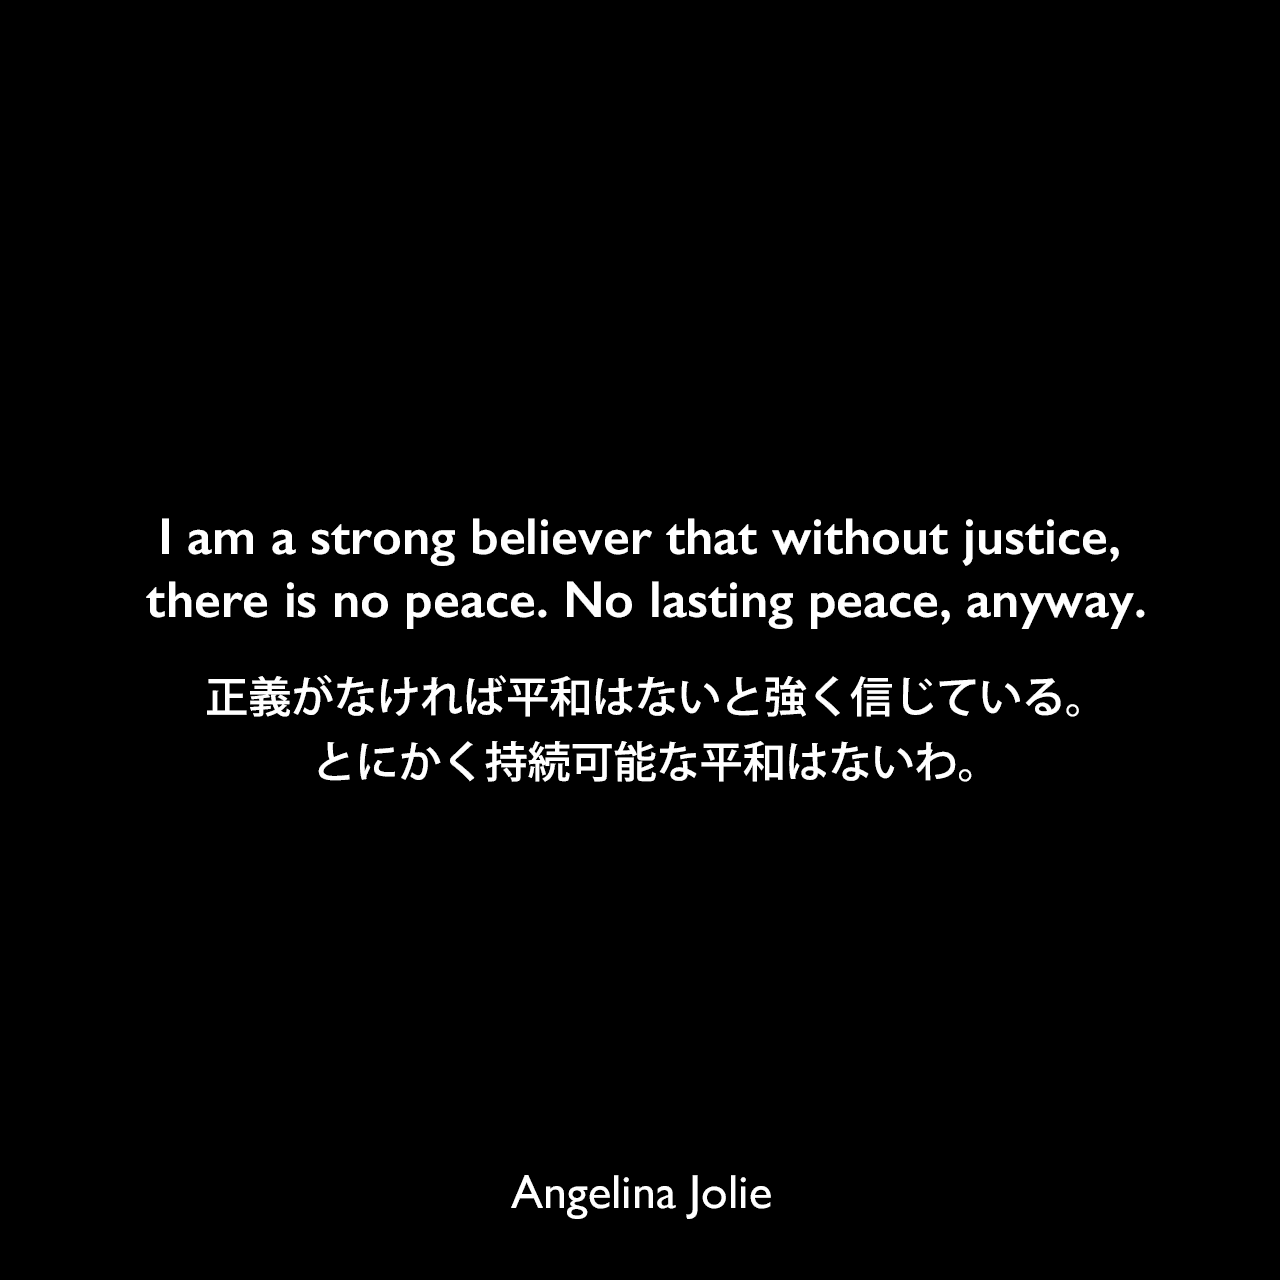 I am a strong believer that without justice, there is no peace. No lasting peace, anyway.正義がなければ平和はないと強く信じている。とにかく持続可能な平和はないわ。Angelina Jolie